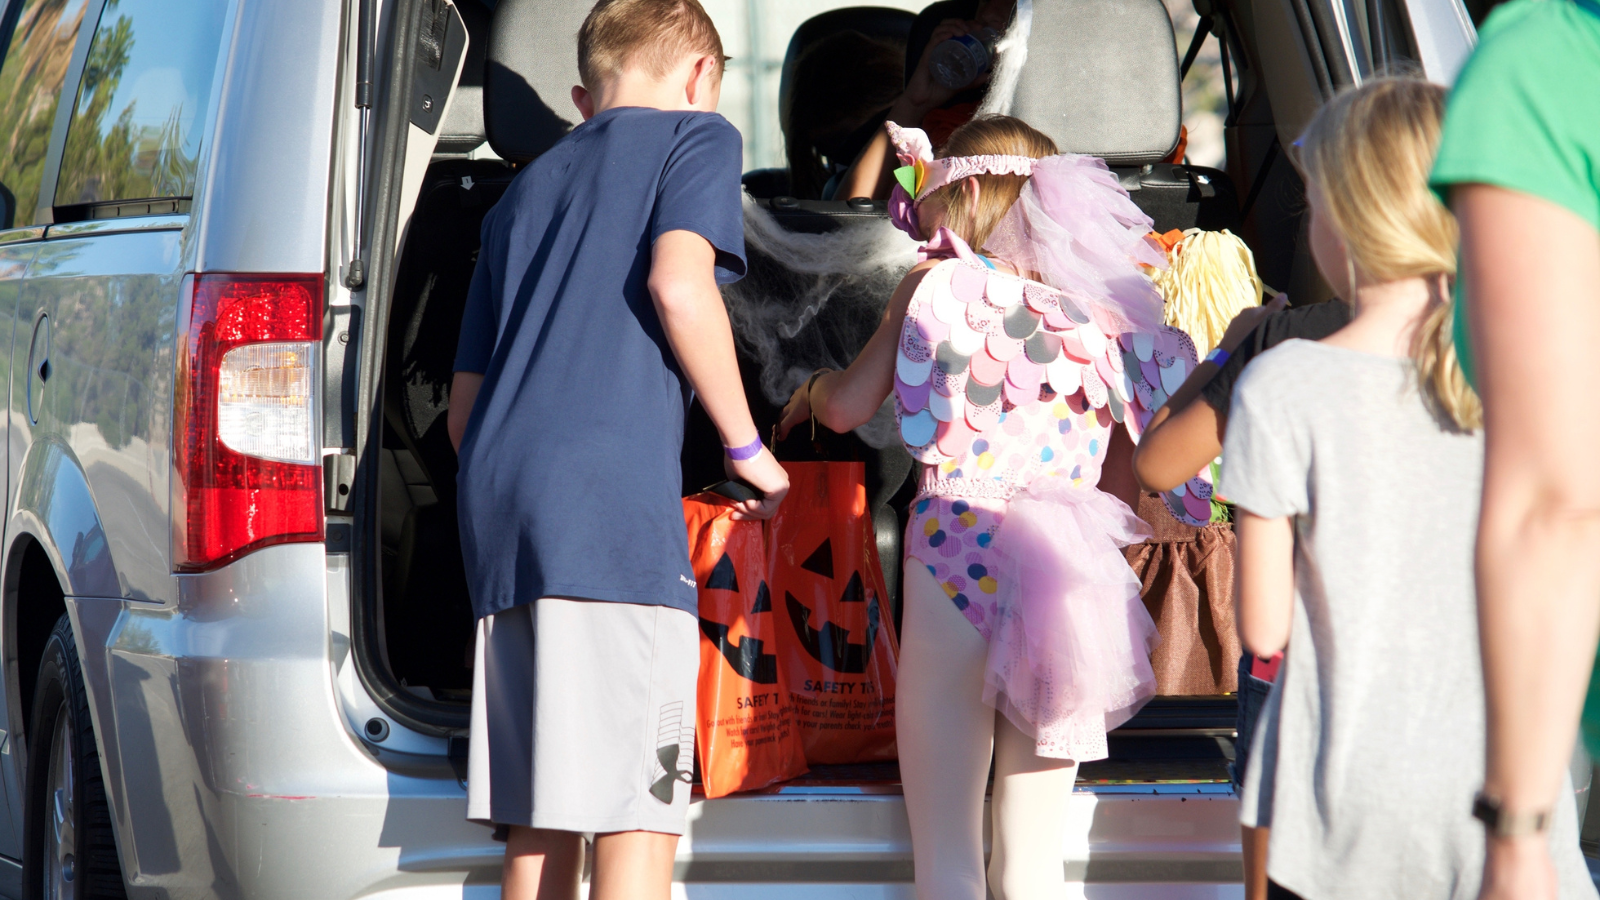 Some kids trick or treating out of the trunk of a car.